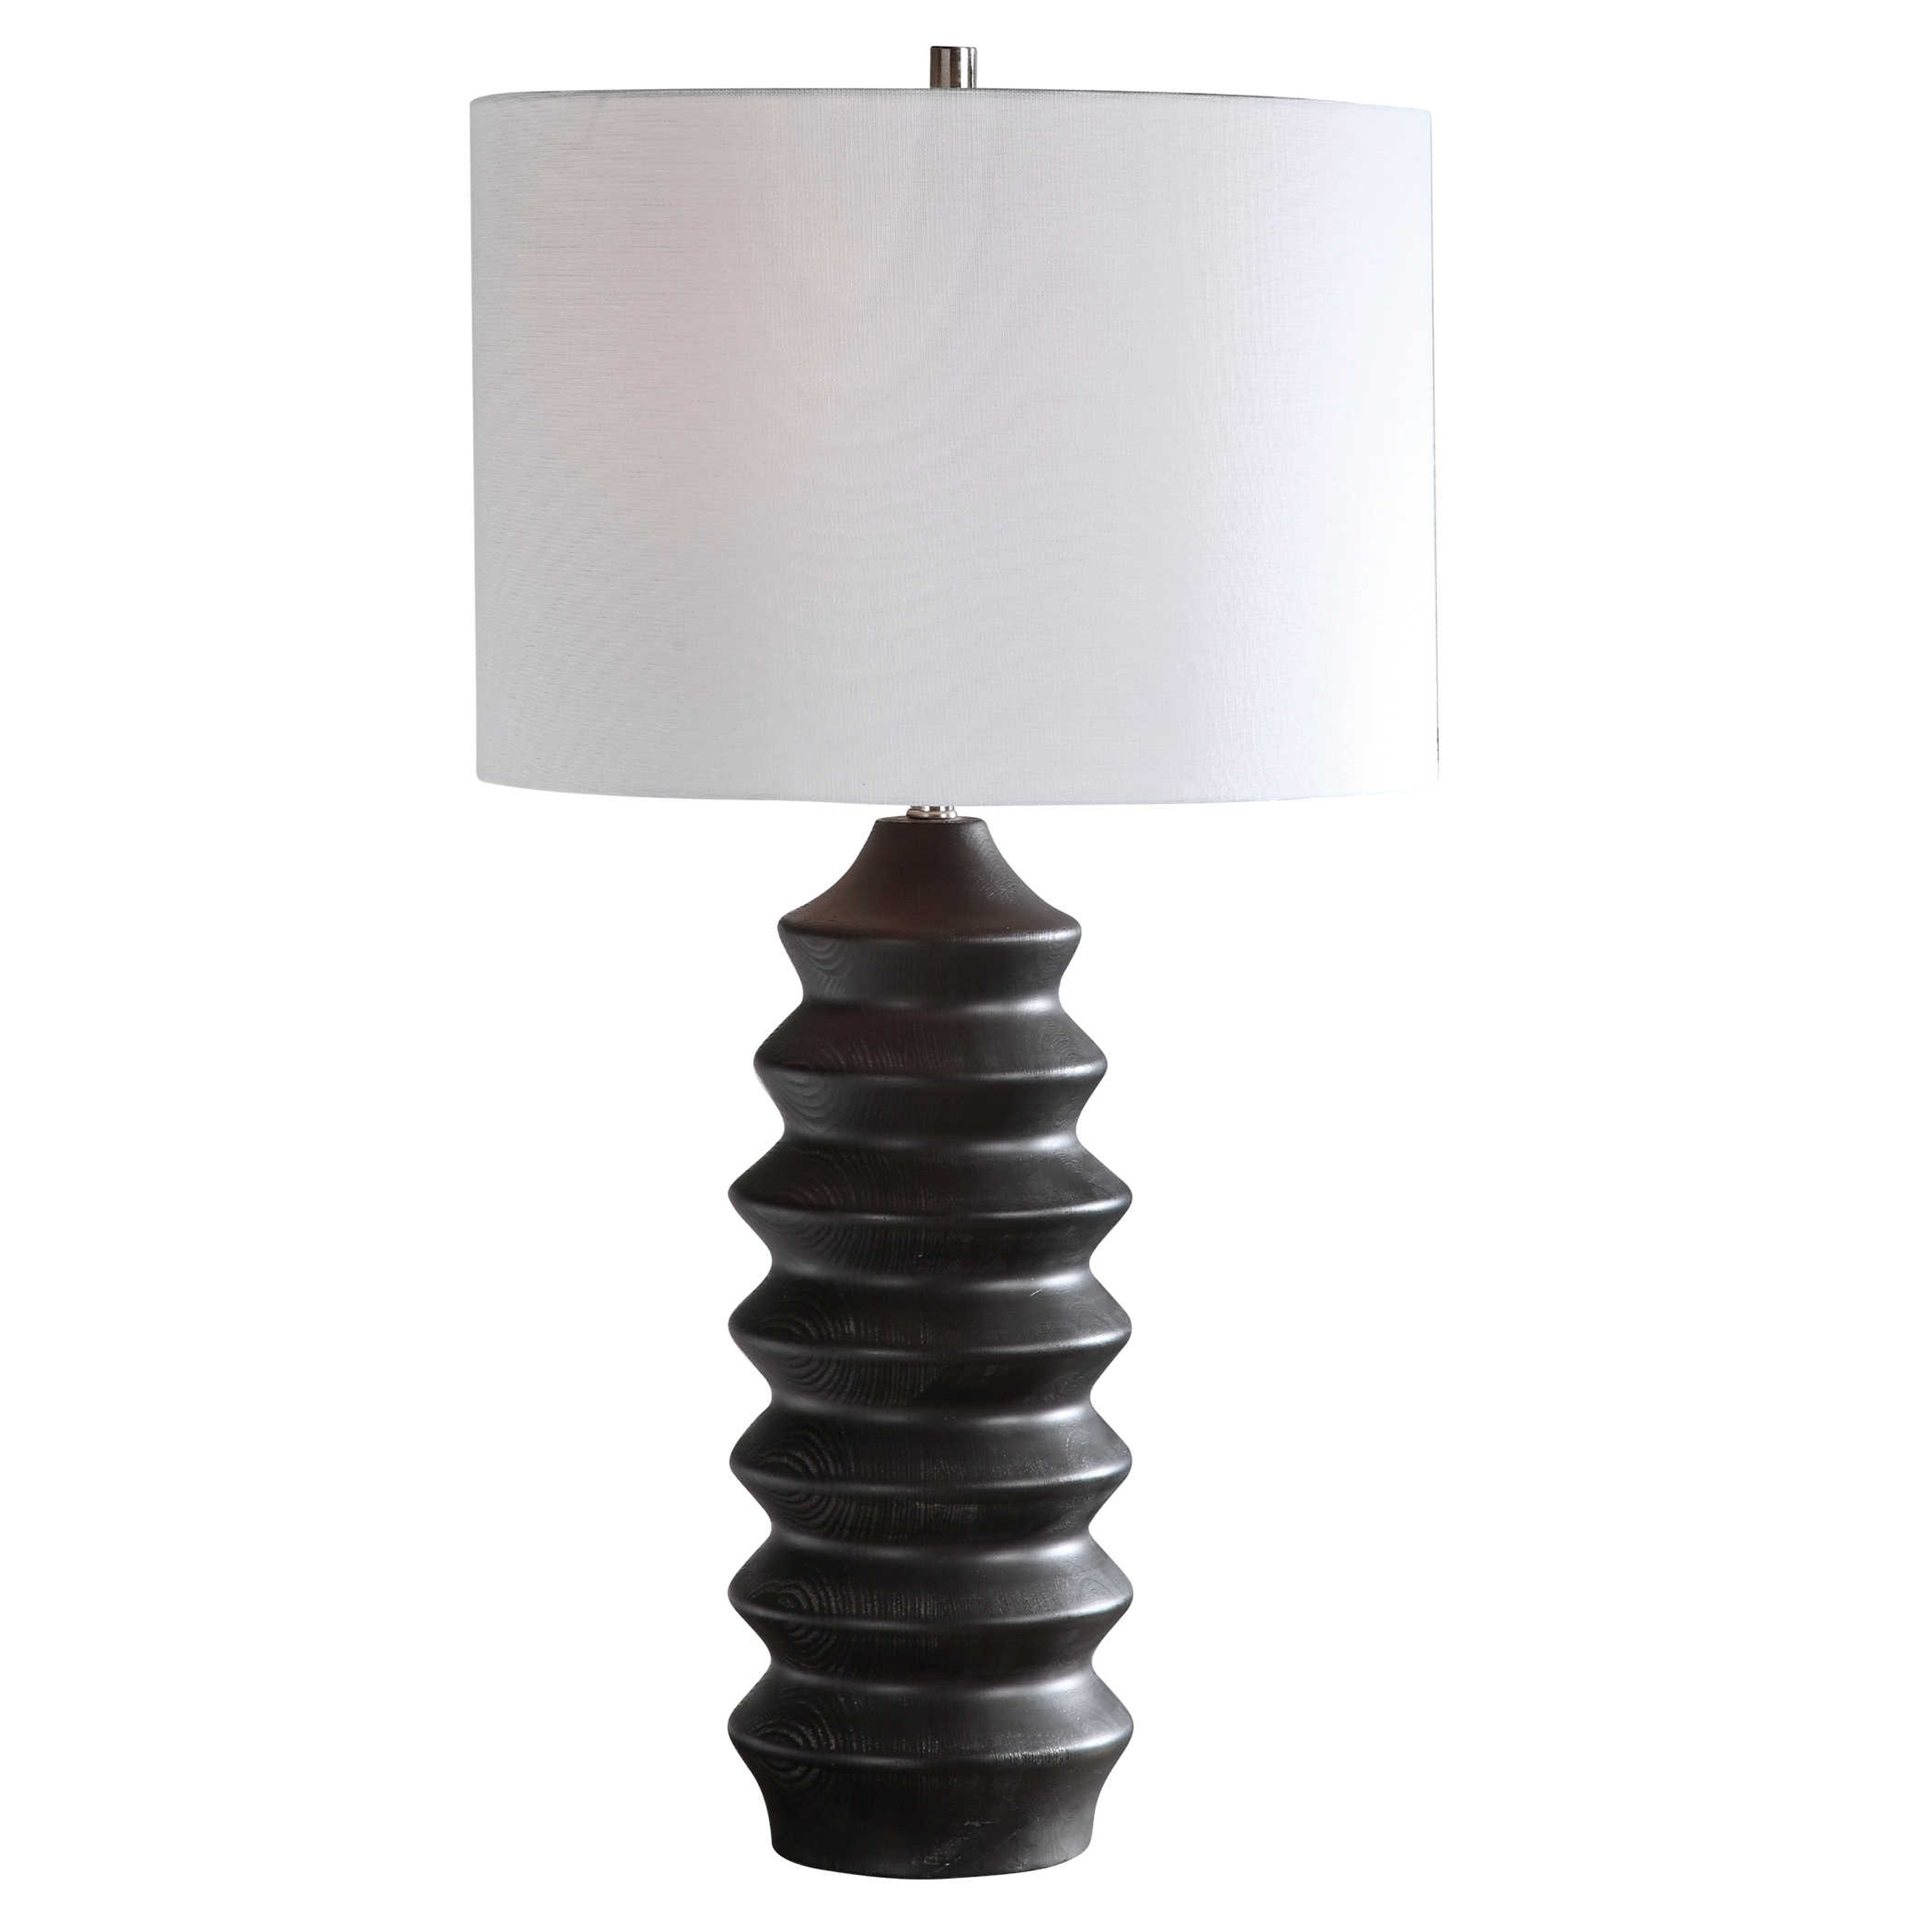 Mendocino Table Lamp - Hudsonhill Foundry